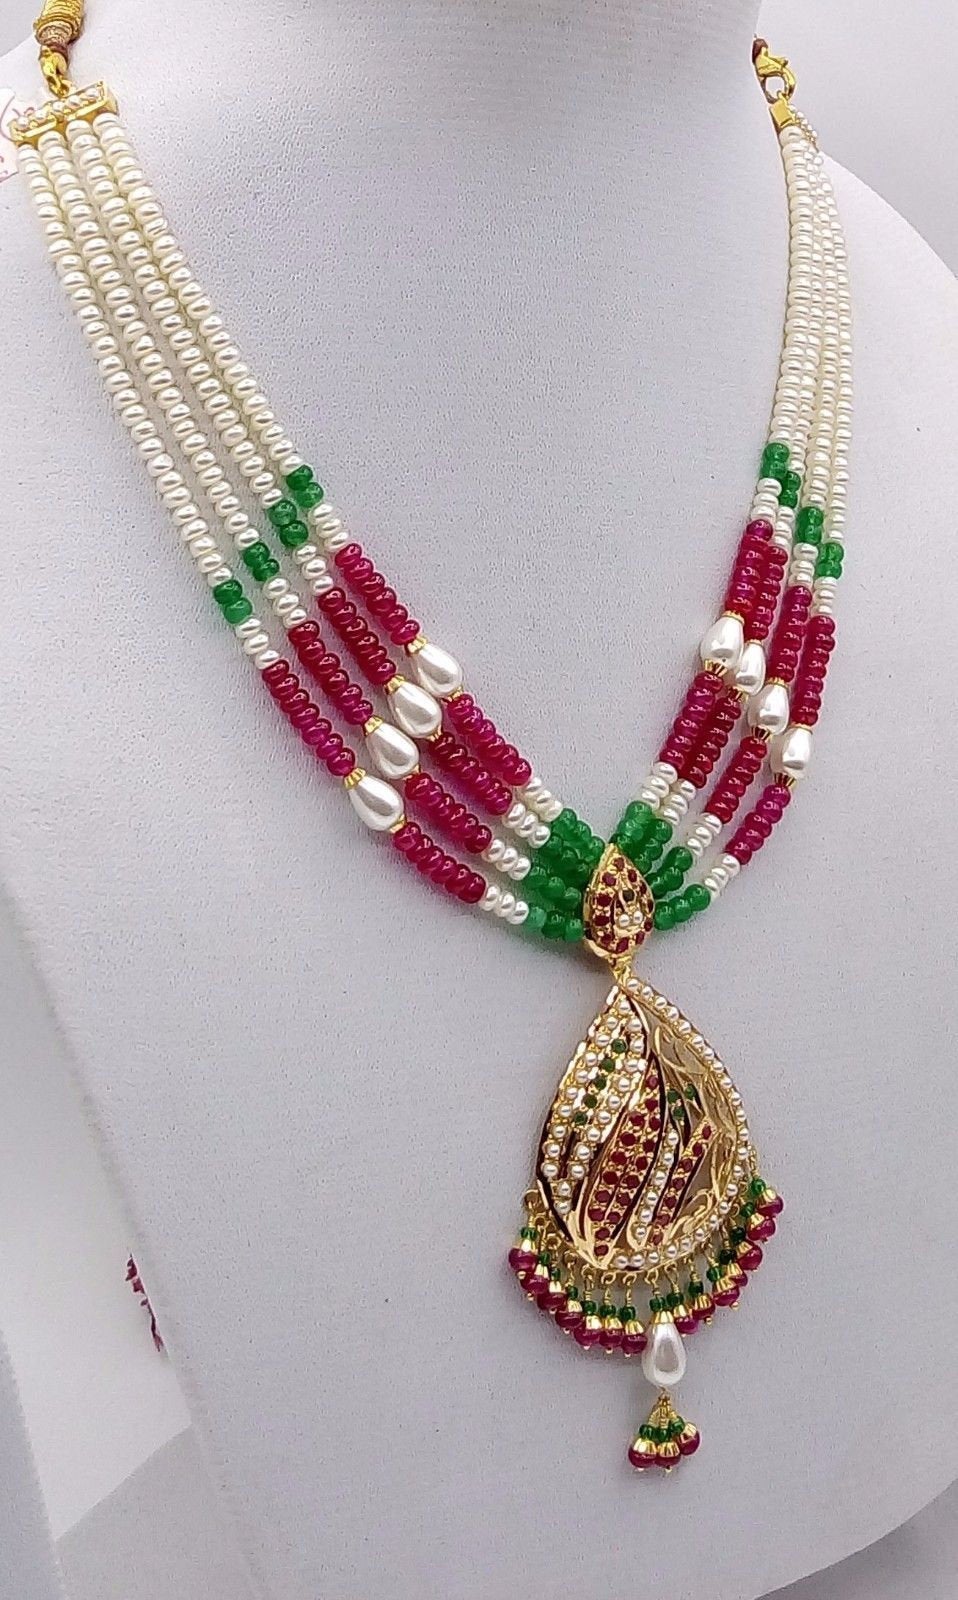 7.0-7.5mm Freshwater Multicolor Pearl Necklace - AAA Quality